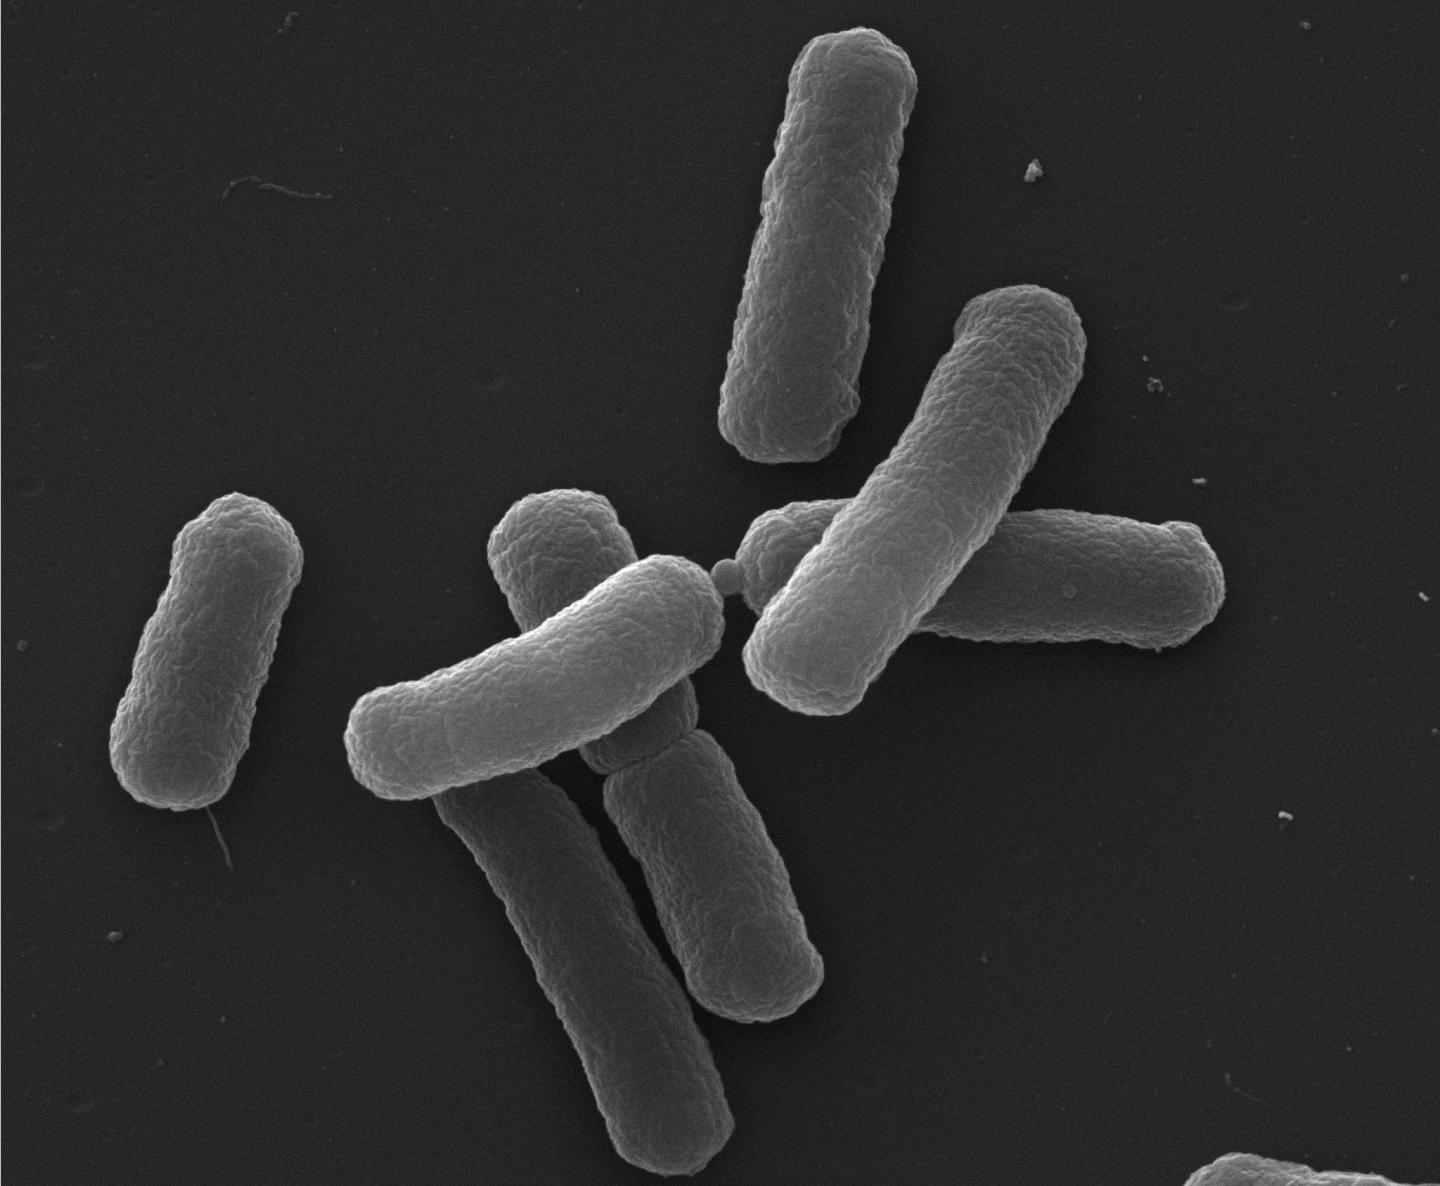 Bacteria Take a Deadly Risk to sSrvive